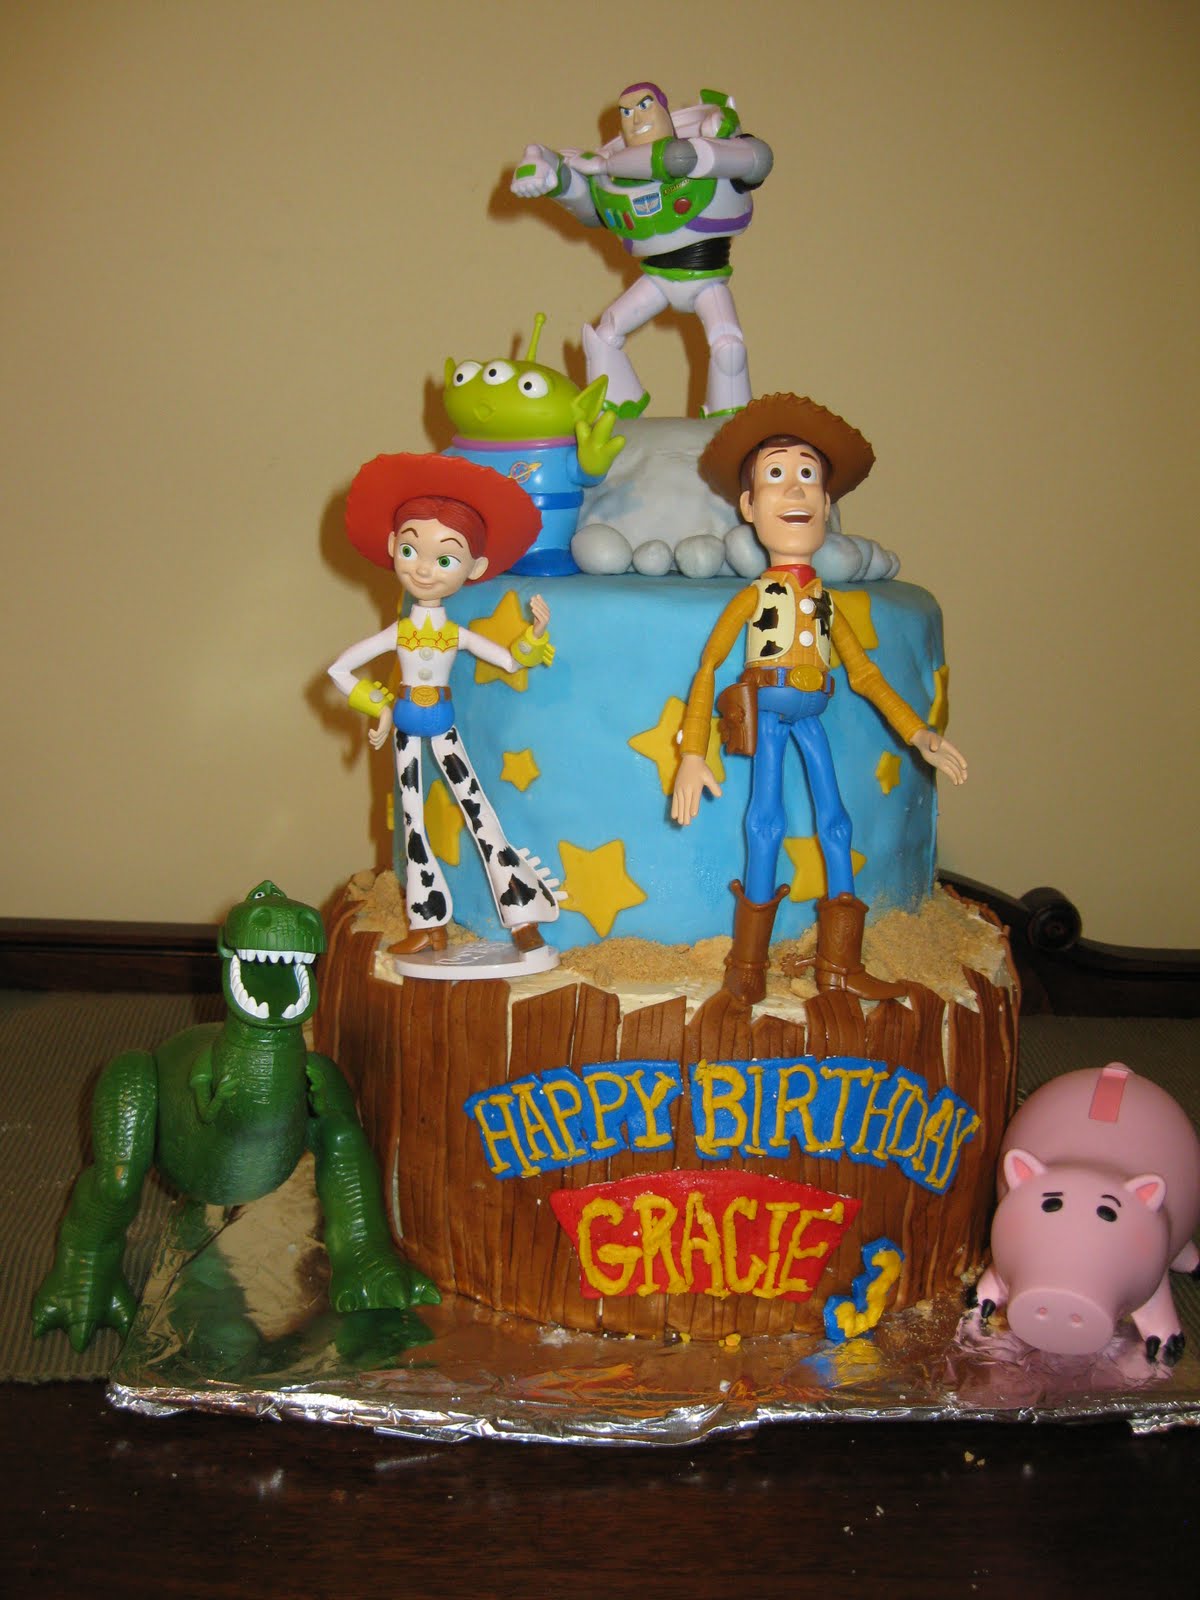 Toy Story Cakes Decoration Ideas Little Birthday Cakes